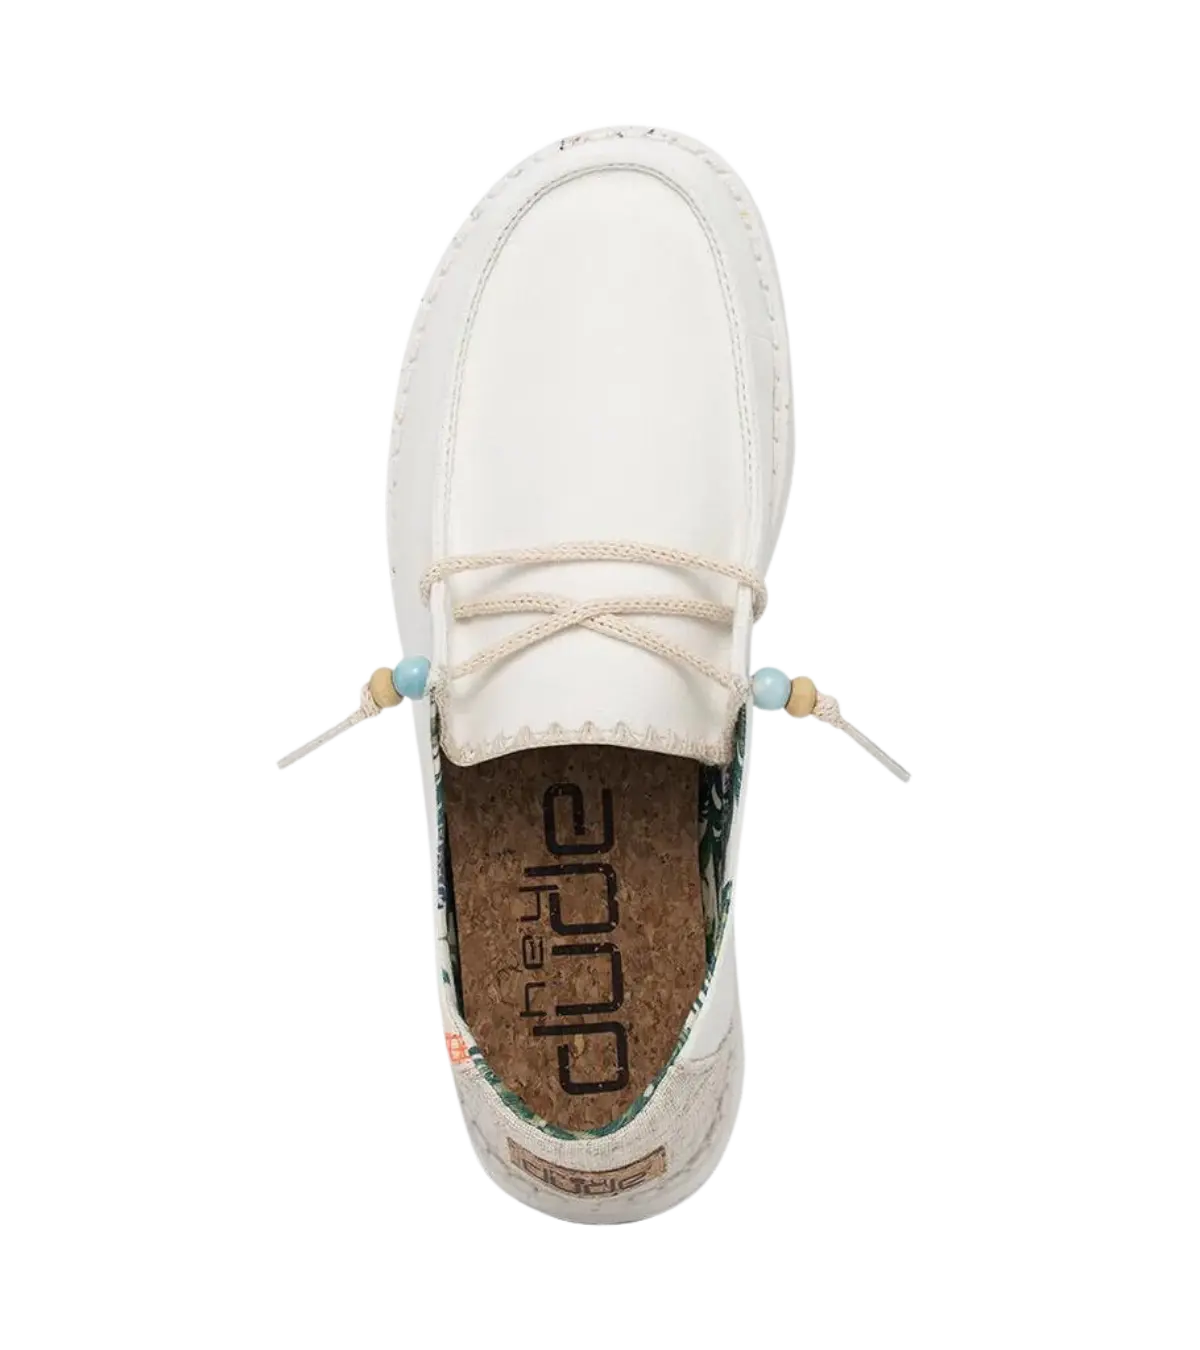 HEYDUDE Women's Wendy Washed Shoes